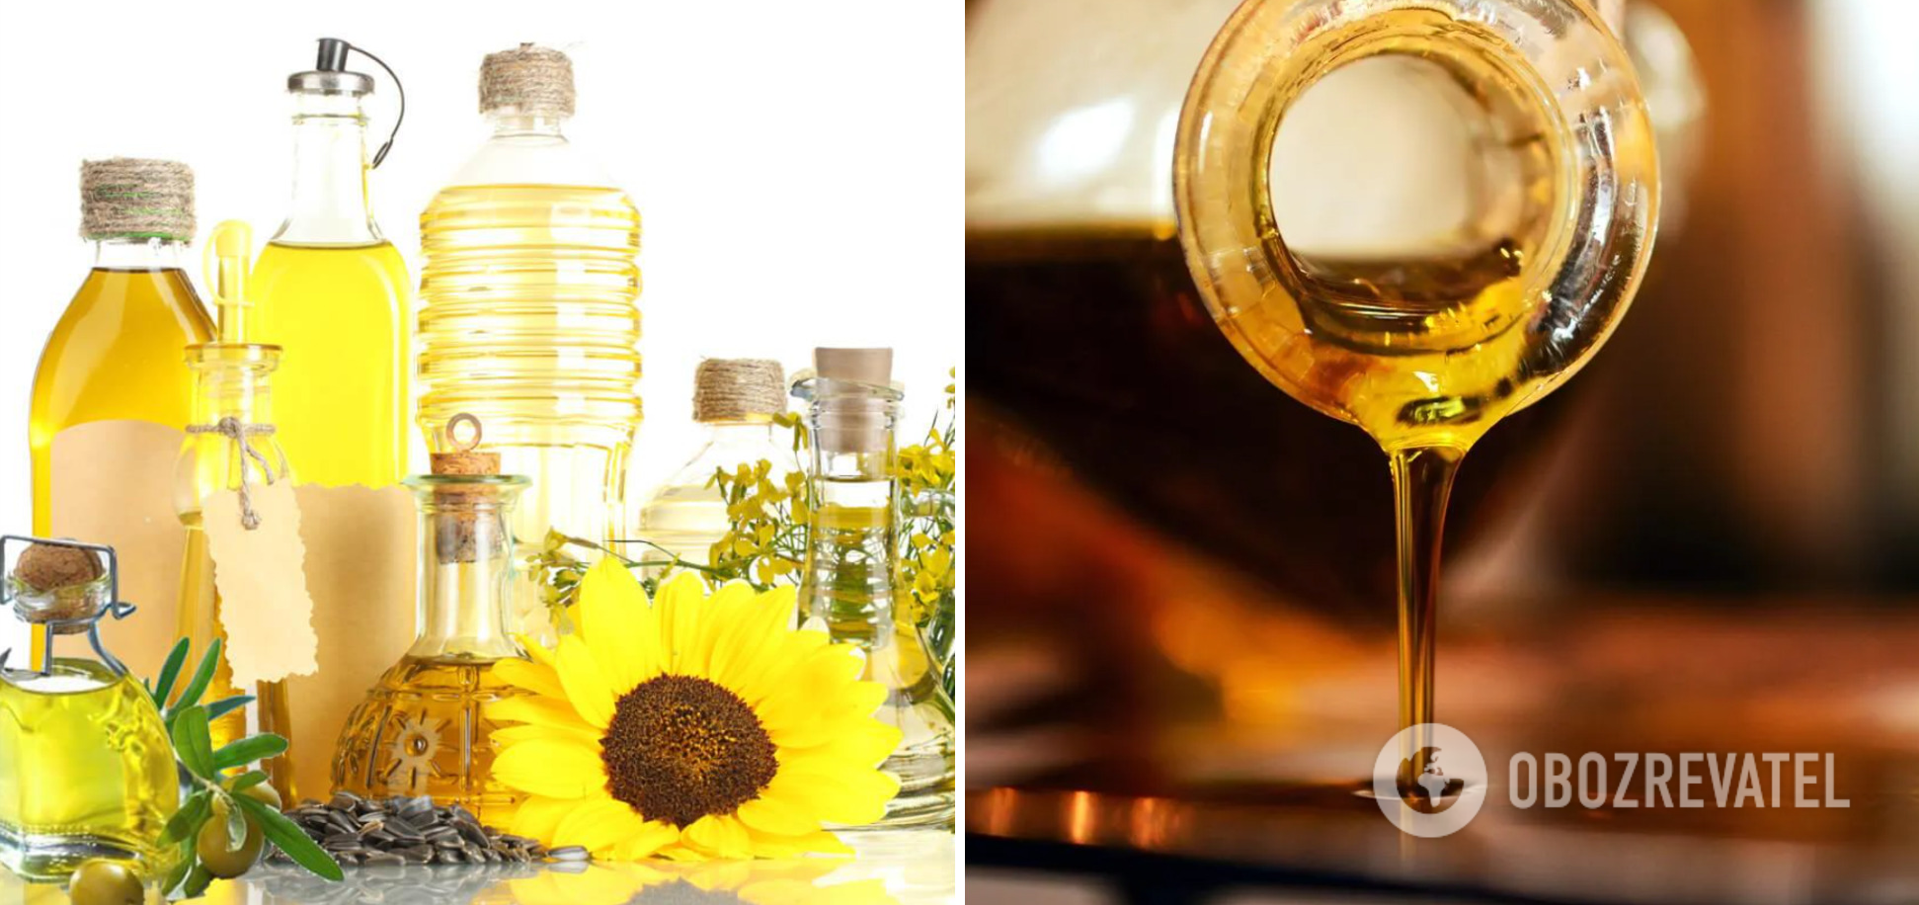 How to check vegetable oil in the store